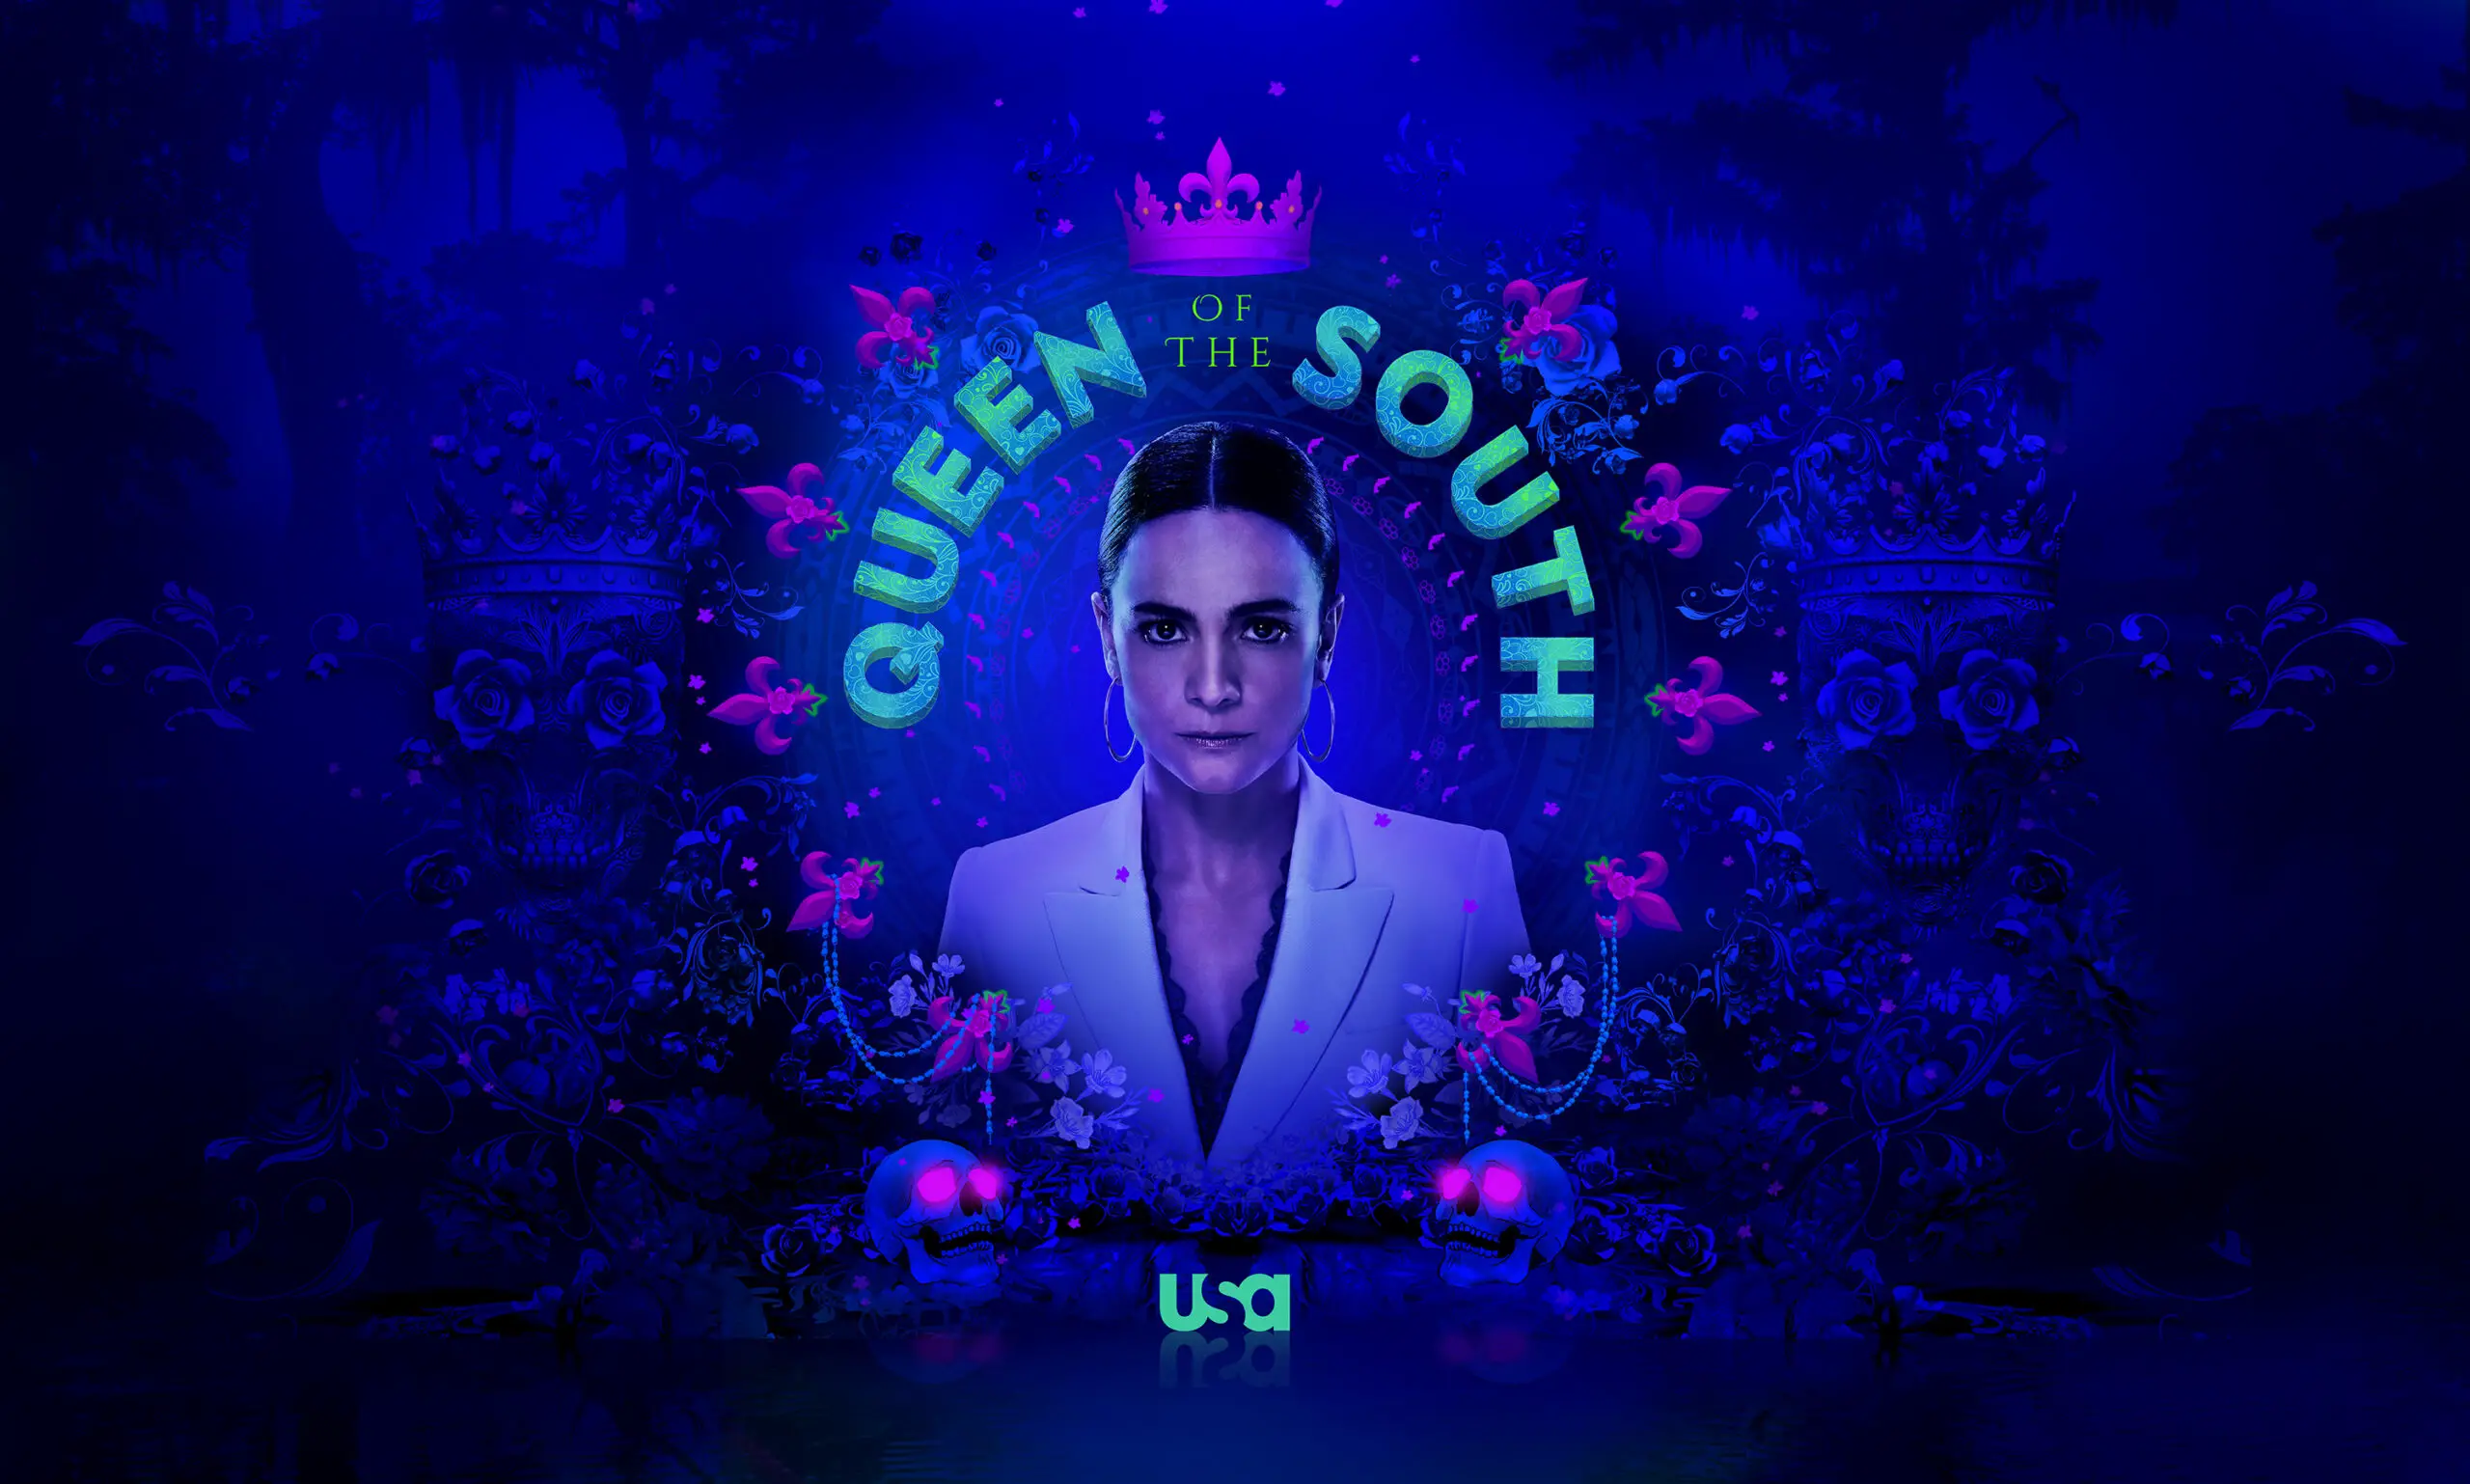 Queen Of The South Season 6 Release Date